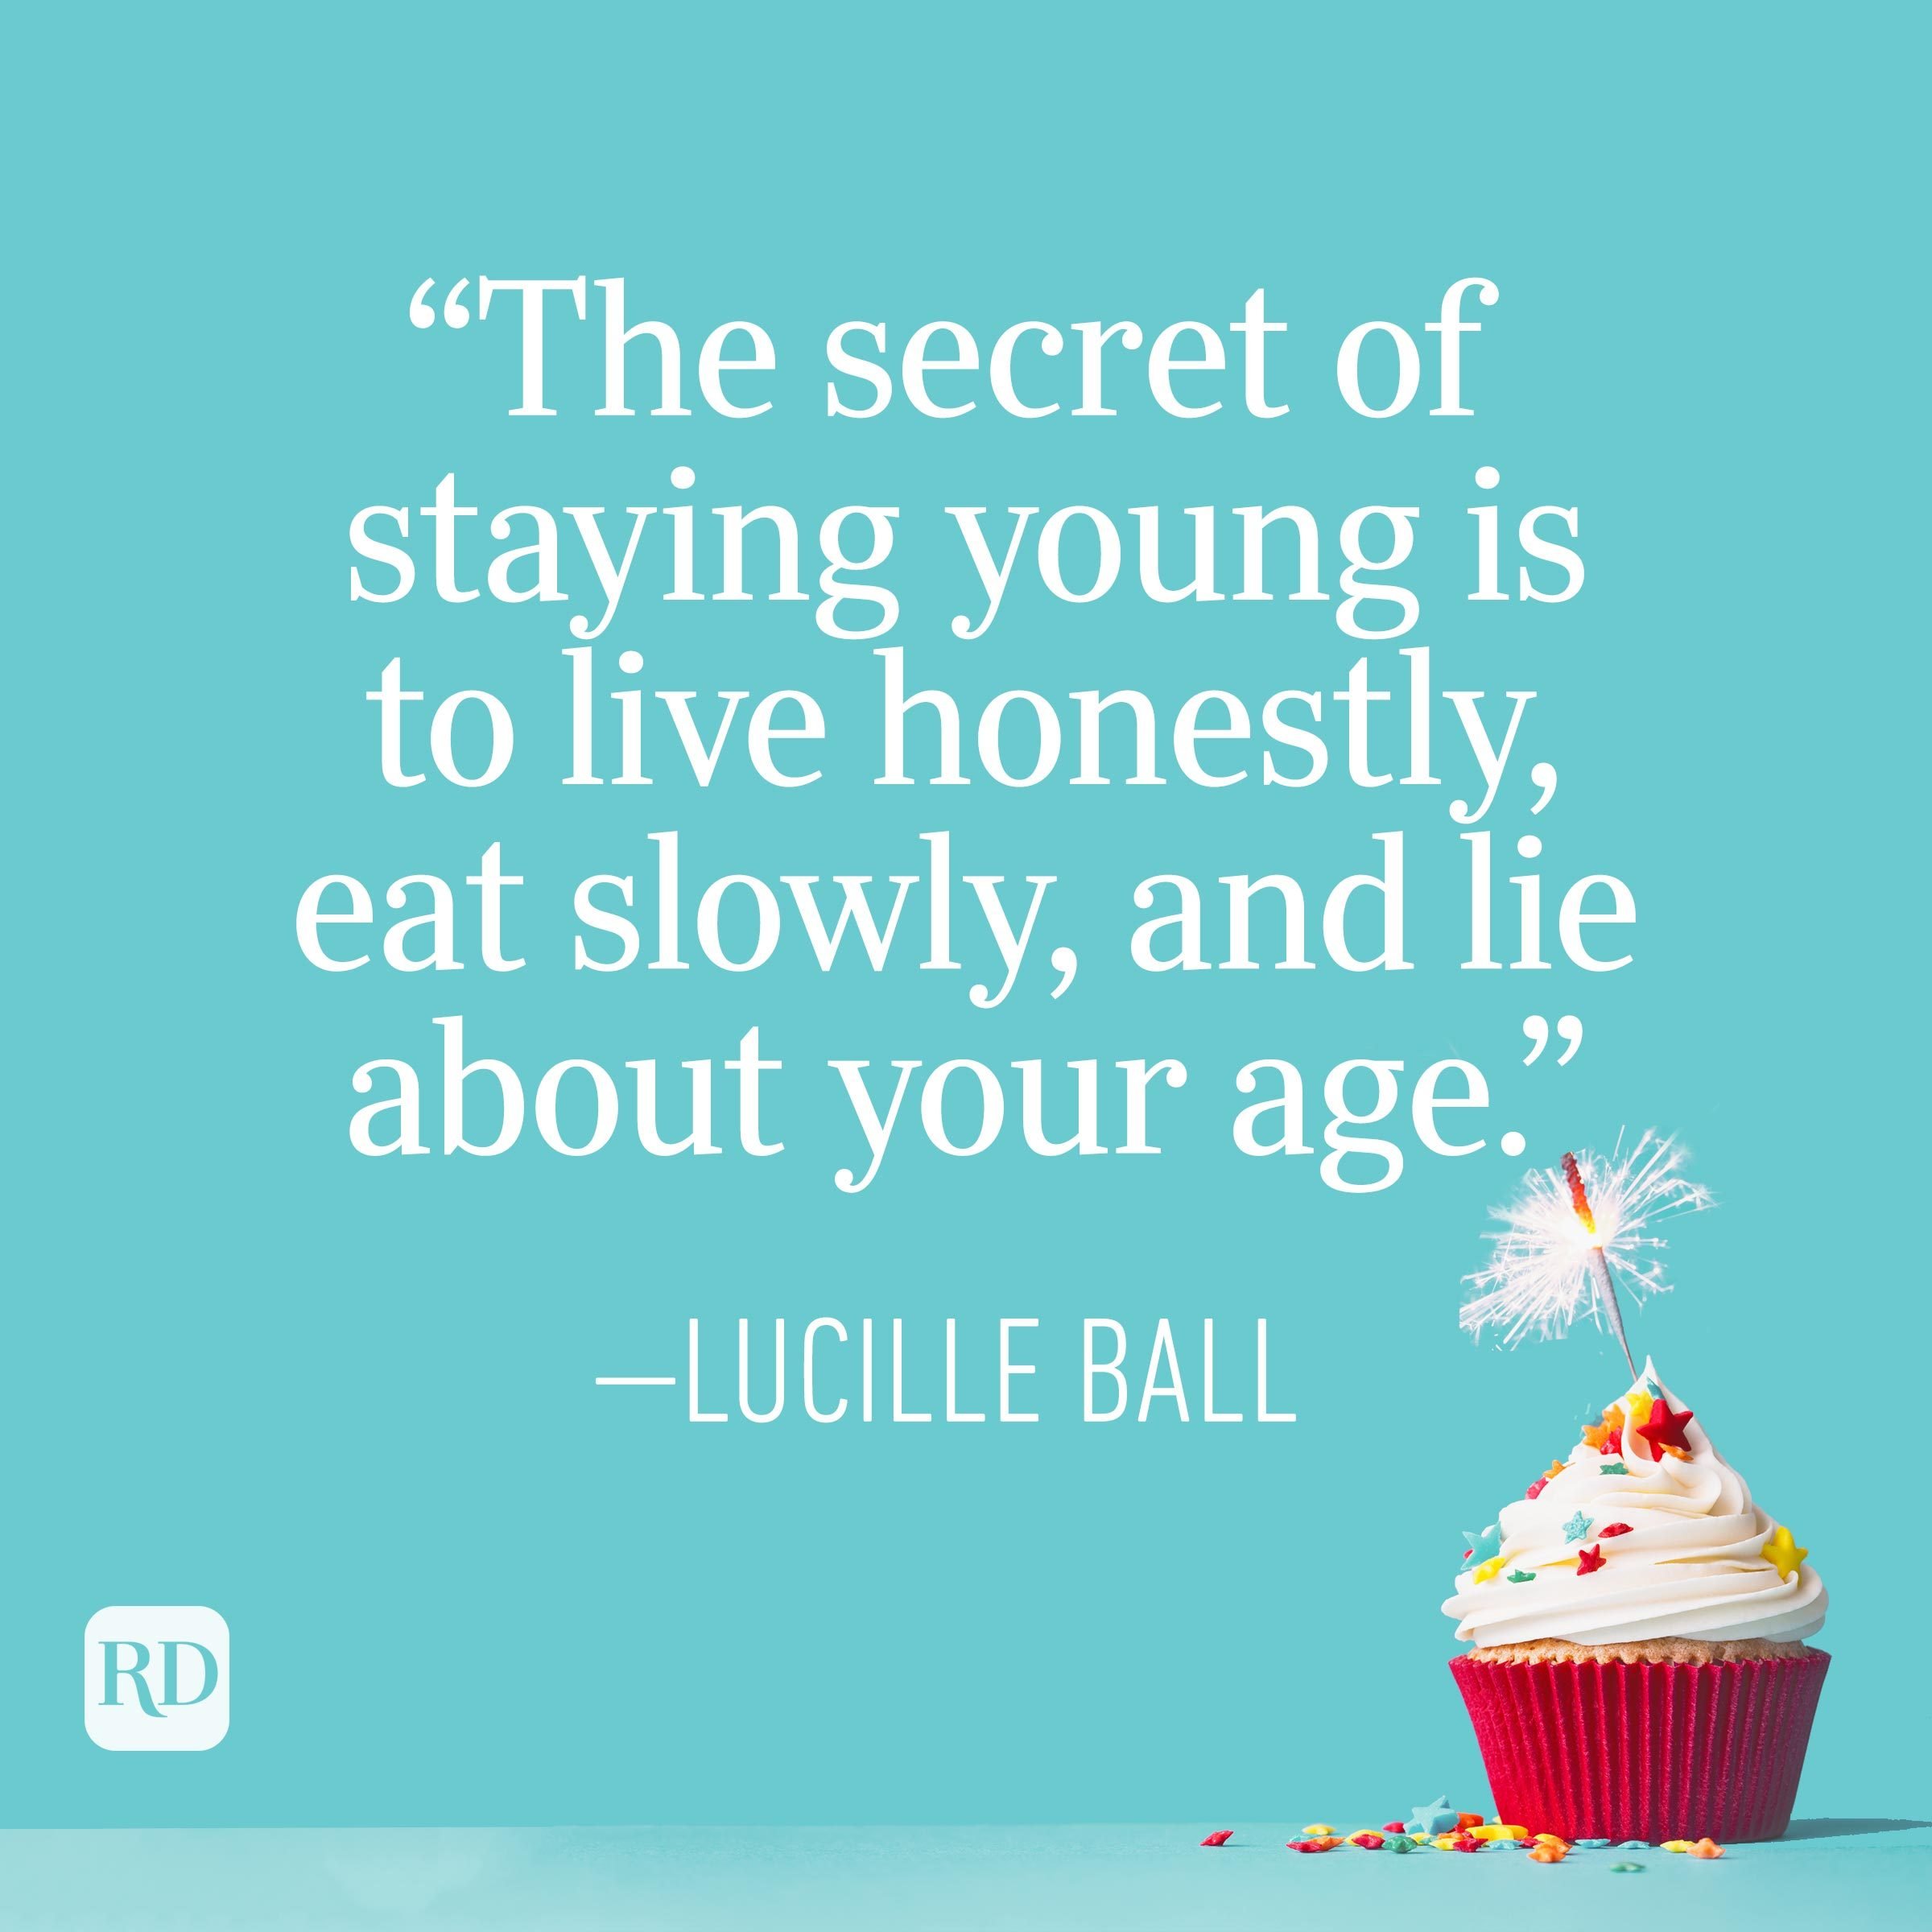 "The secret of staying young is to live honestly, eat slowly, and lie about your age." —Lucille Ball